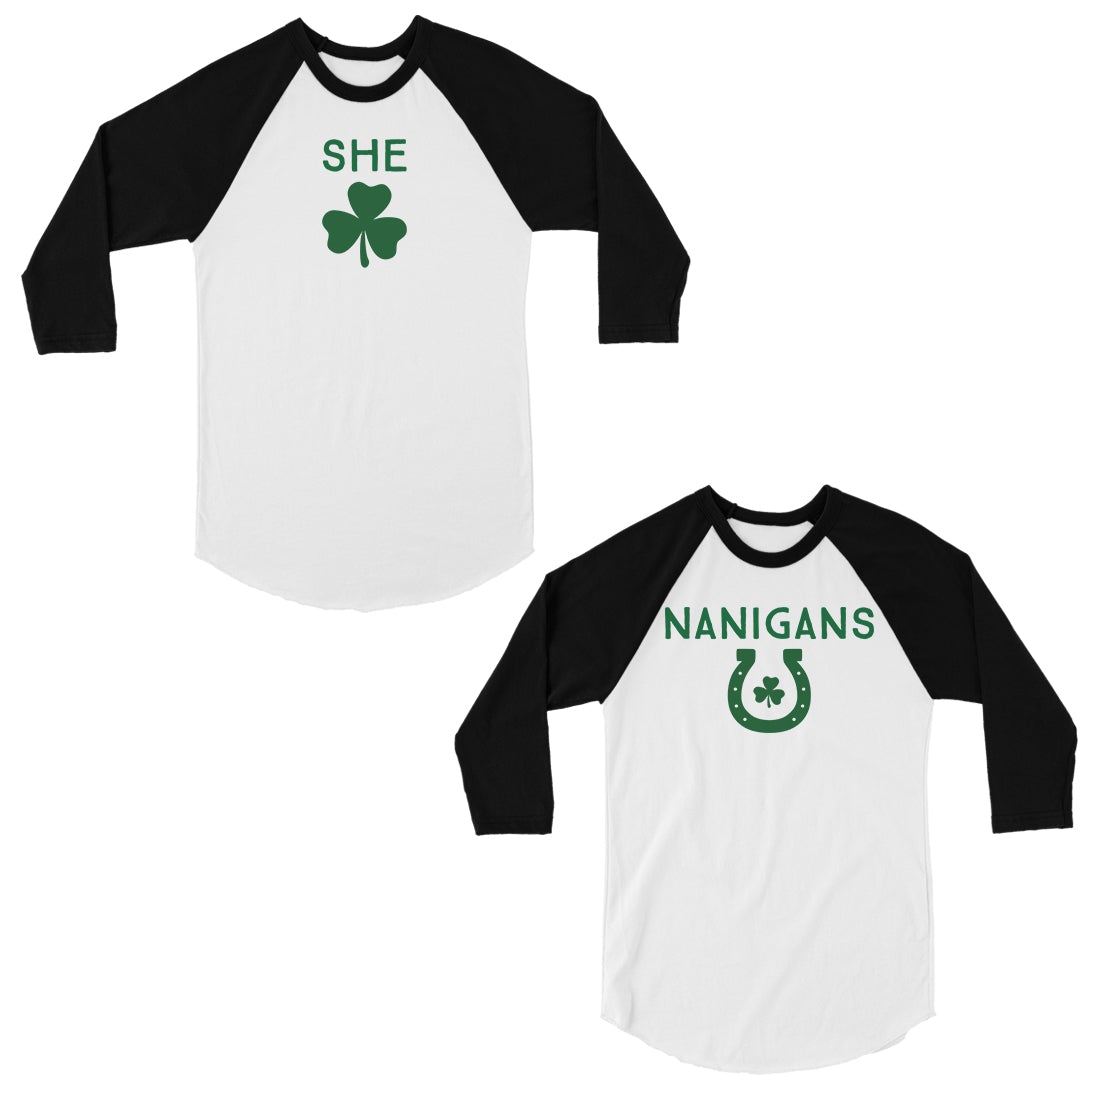 Shenanigans Best Friend Matching Baseball Shirt For St Paddy's Day Black and White